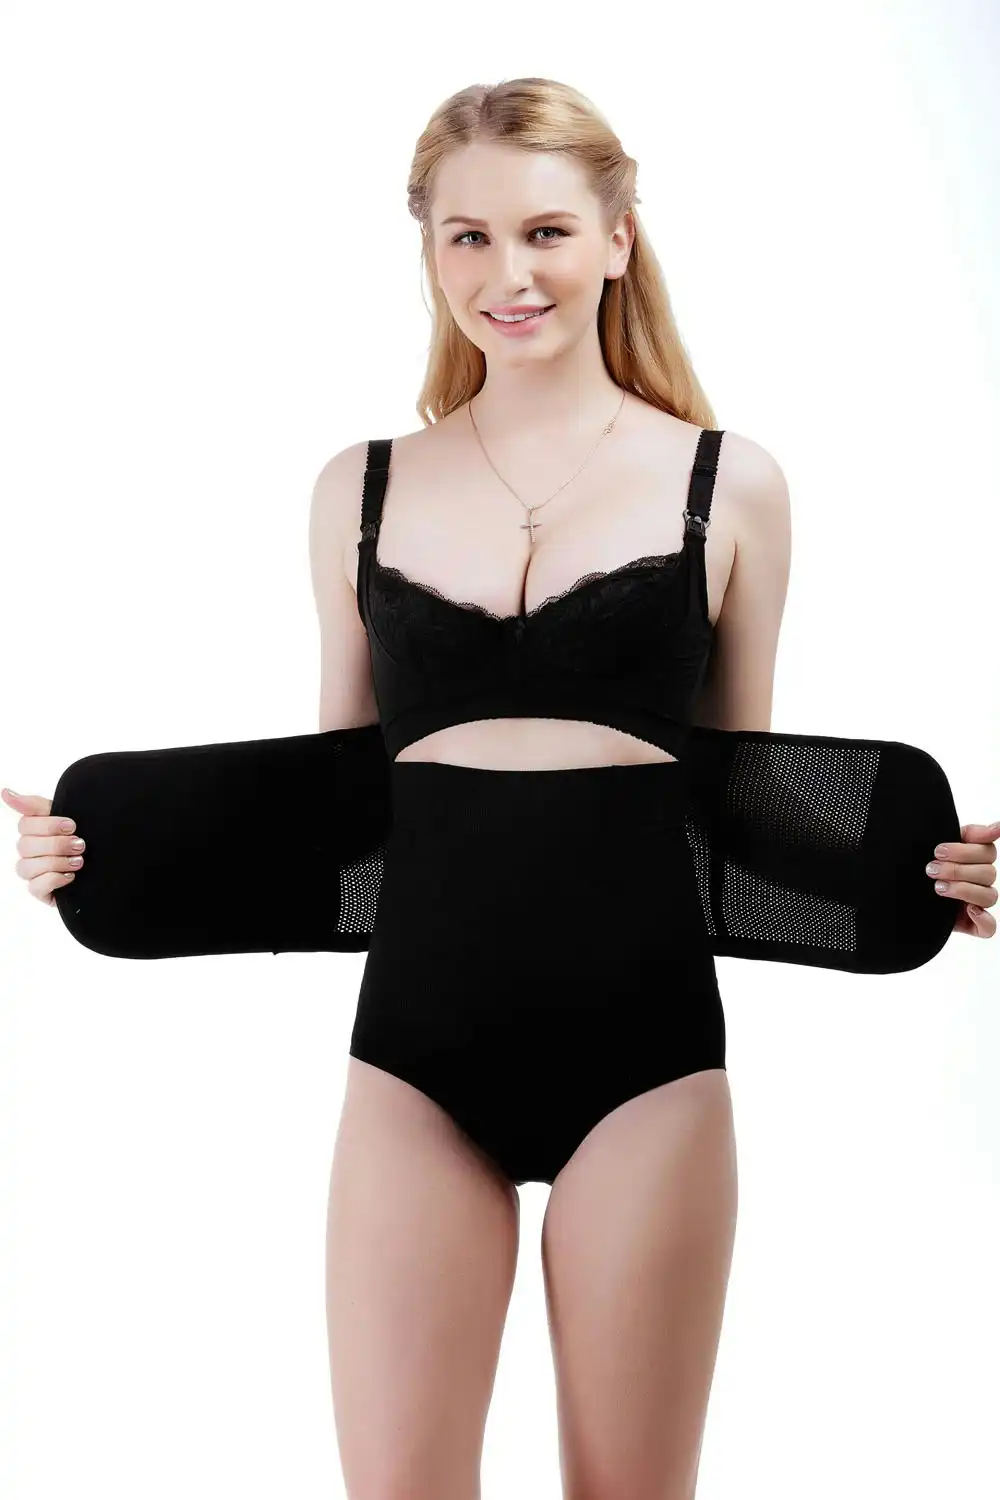 Double Compression Waist Trainer Compression Body Shaper Support Black - Large